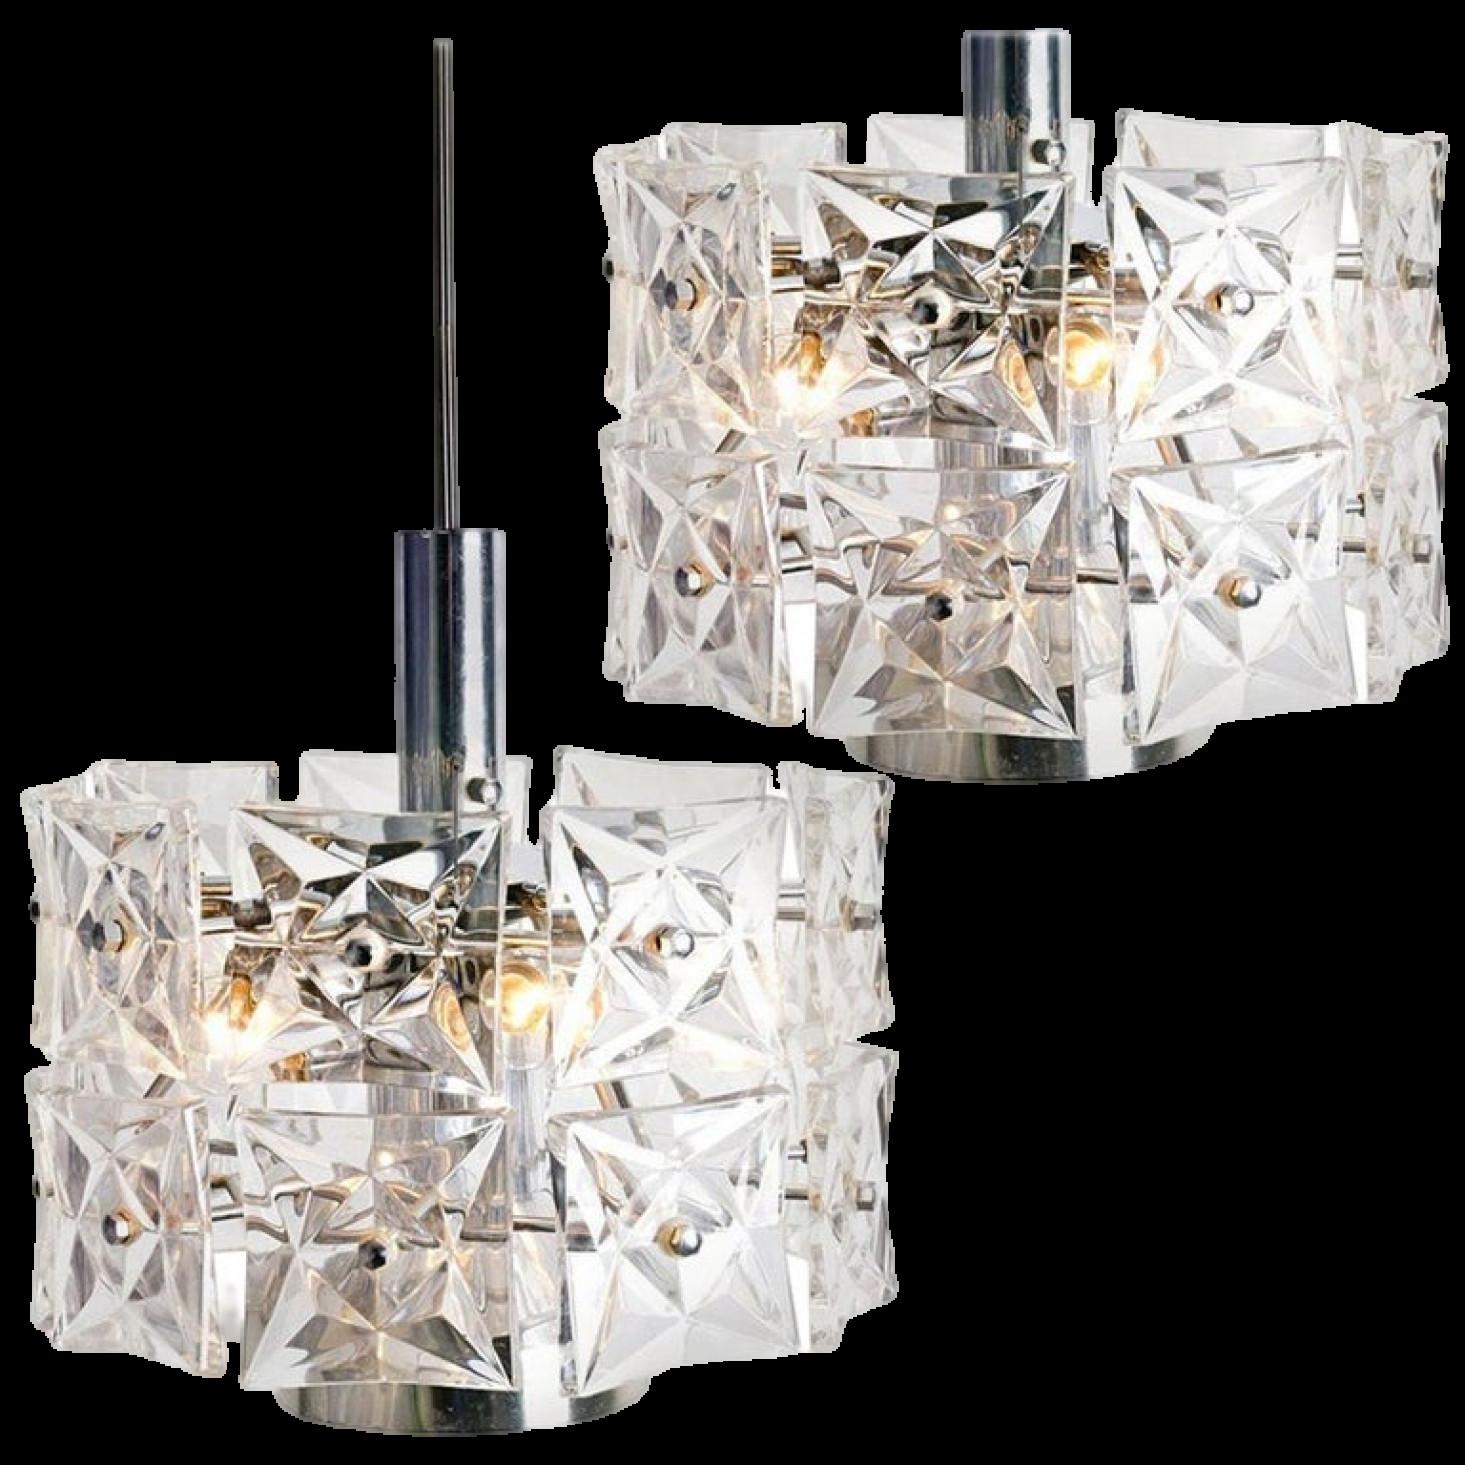 A pair of very modern, elegant and fine Kinkeldey chandeliers. Really heavy quality. They are comfortable with all decor periods. This chandeliers are executed to a very high standard. The quality large square crystals beautifully reflecting the